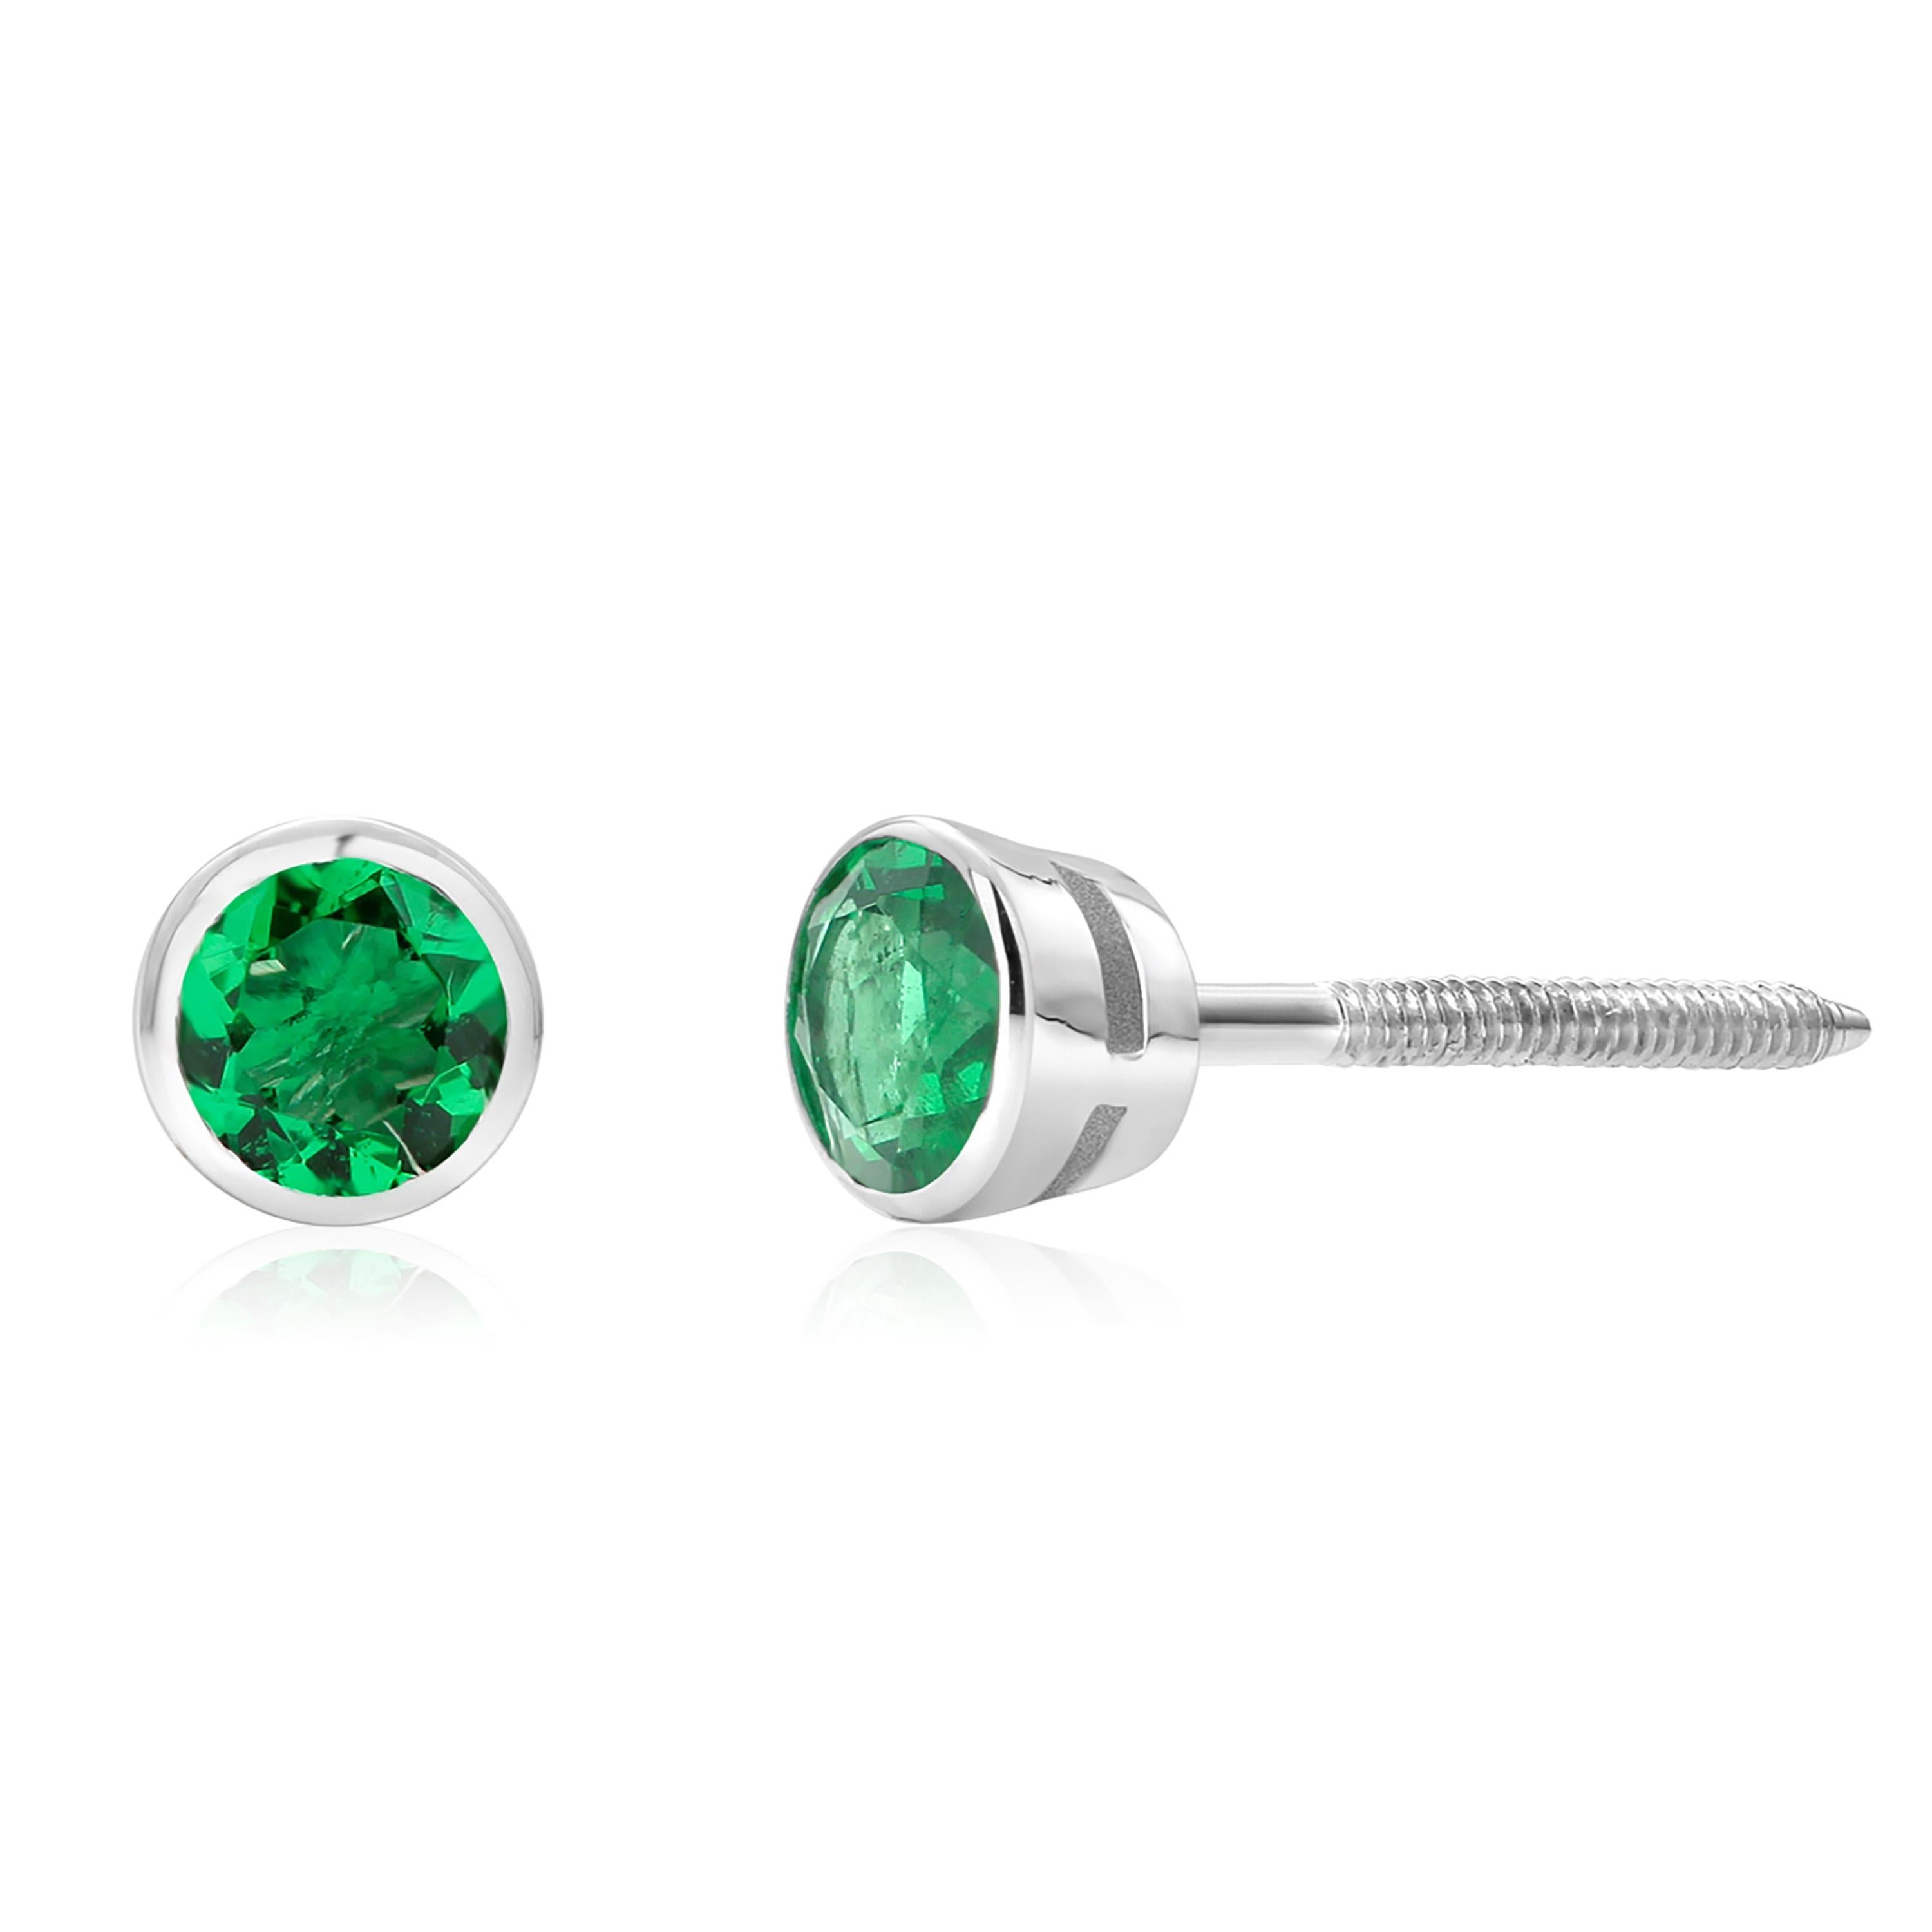 Contemporary White Gold Bezel Round Emerald Stud Earrings